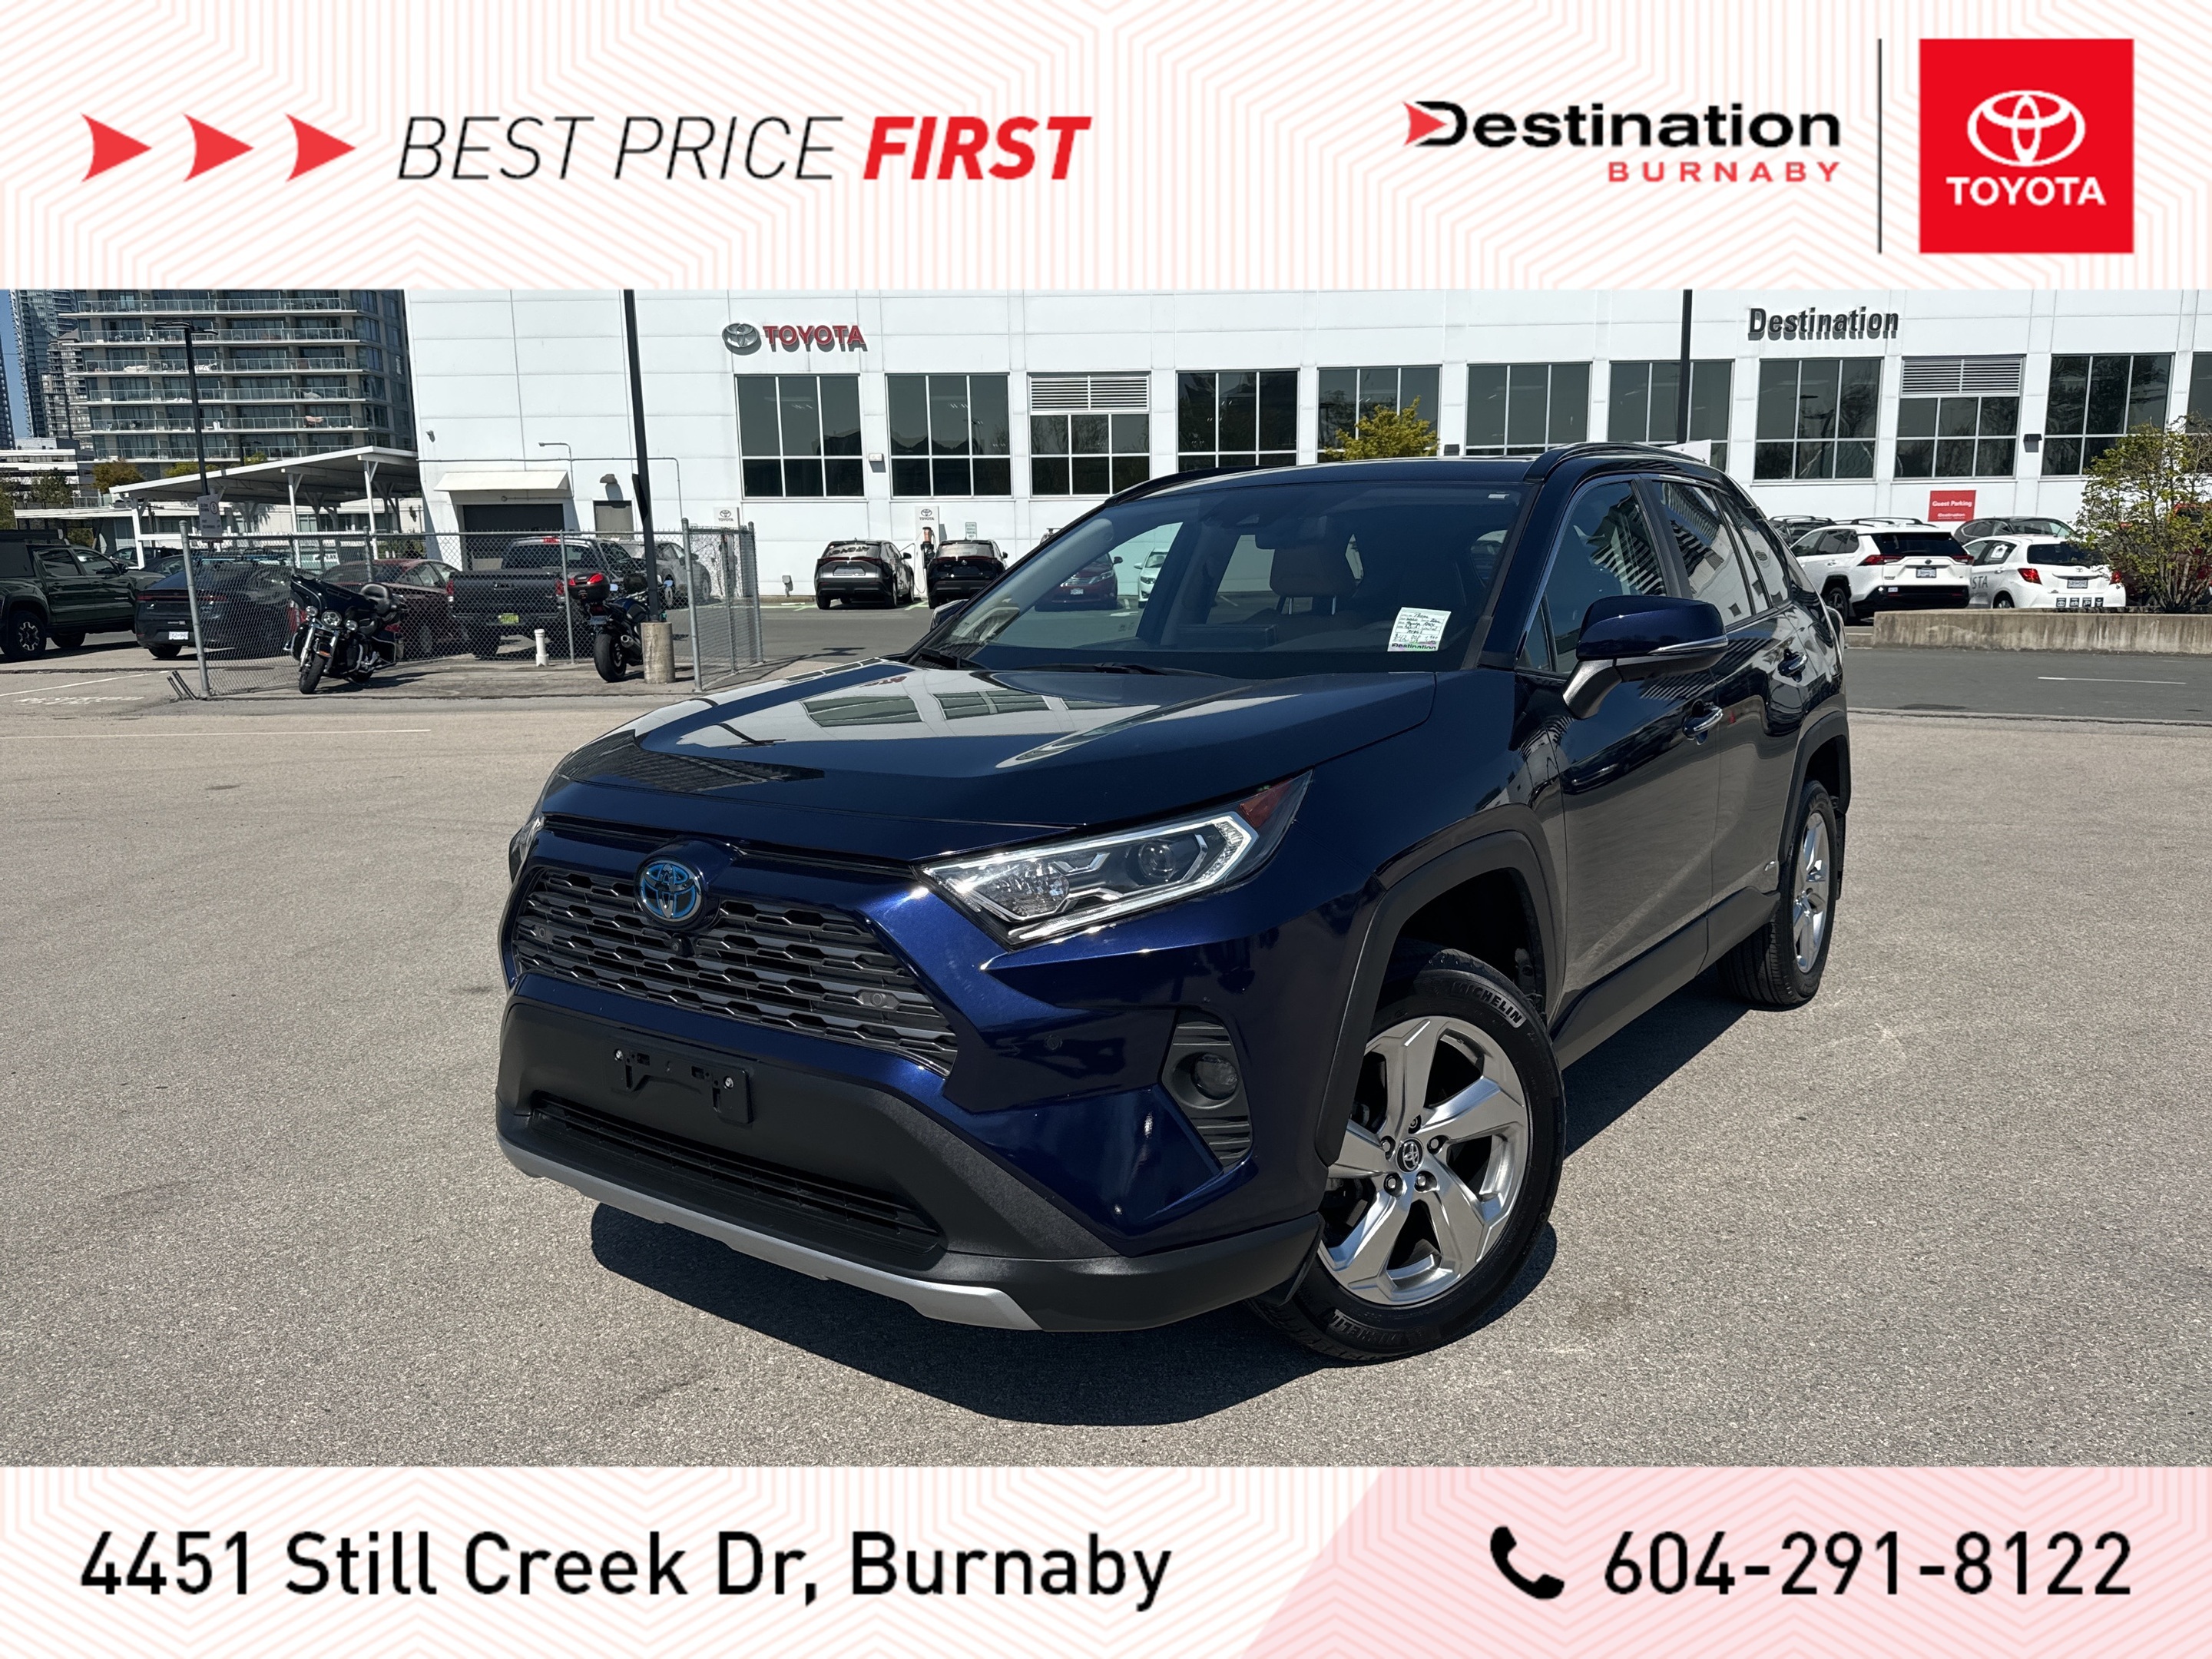 2020 Toyota RAV4 Hybrid Limited Top Trim! Toyota Certified! Fully Equipped